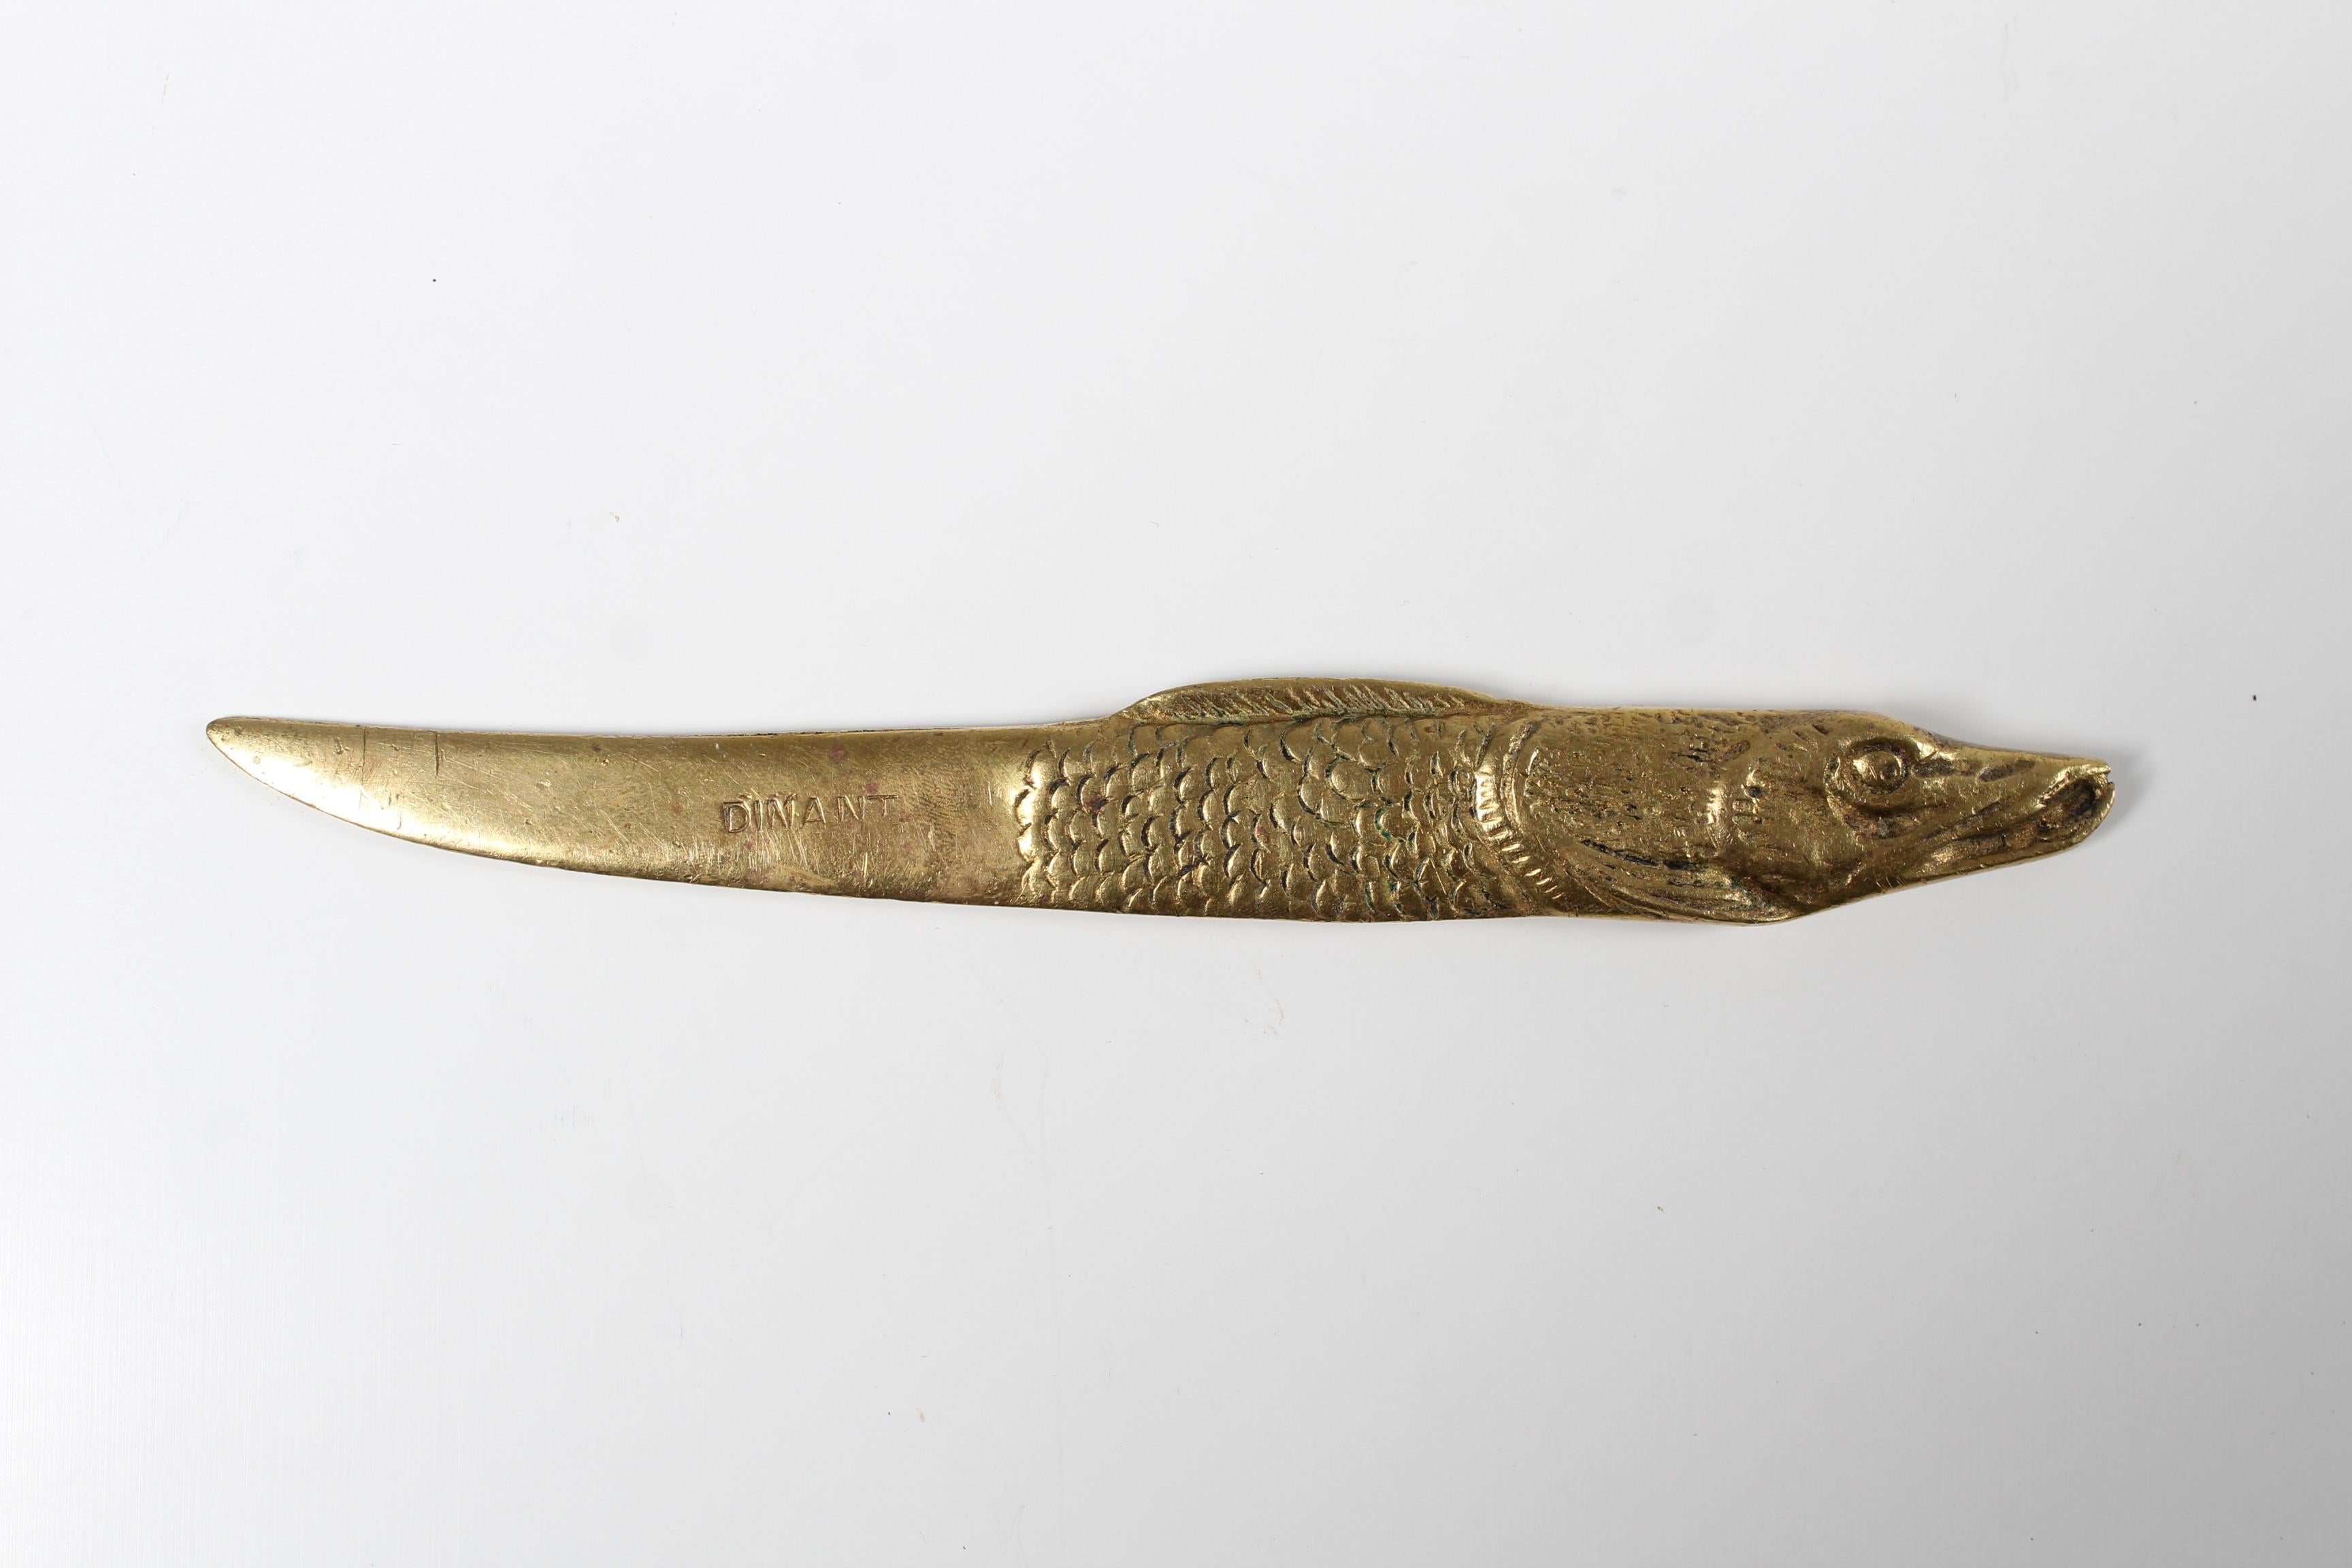 Antique Letter Opener with Fish.

So beautiful, very nice condition!